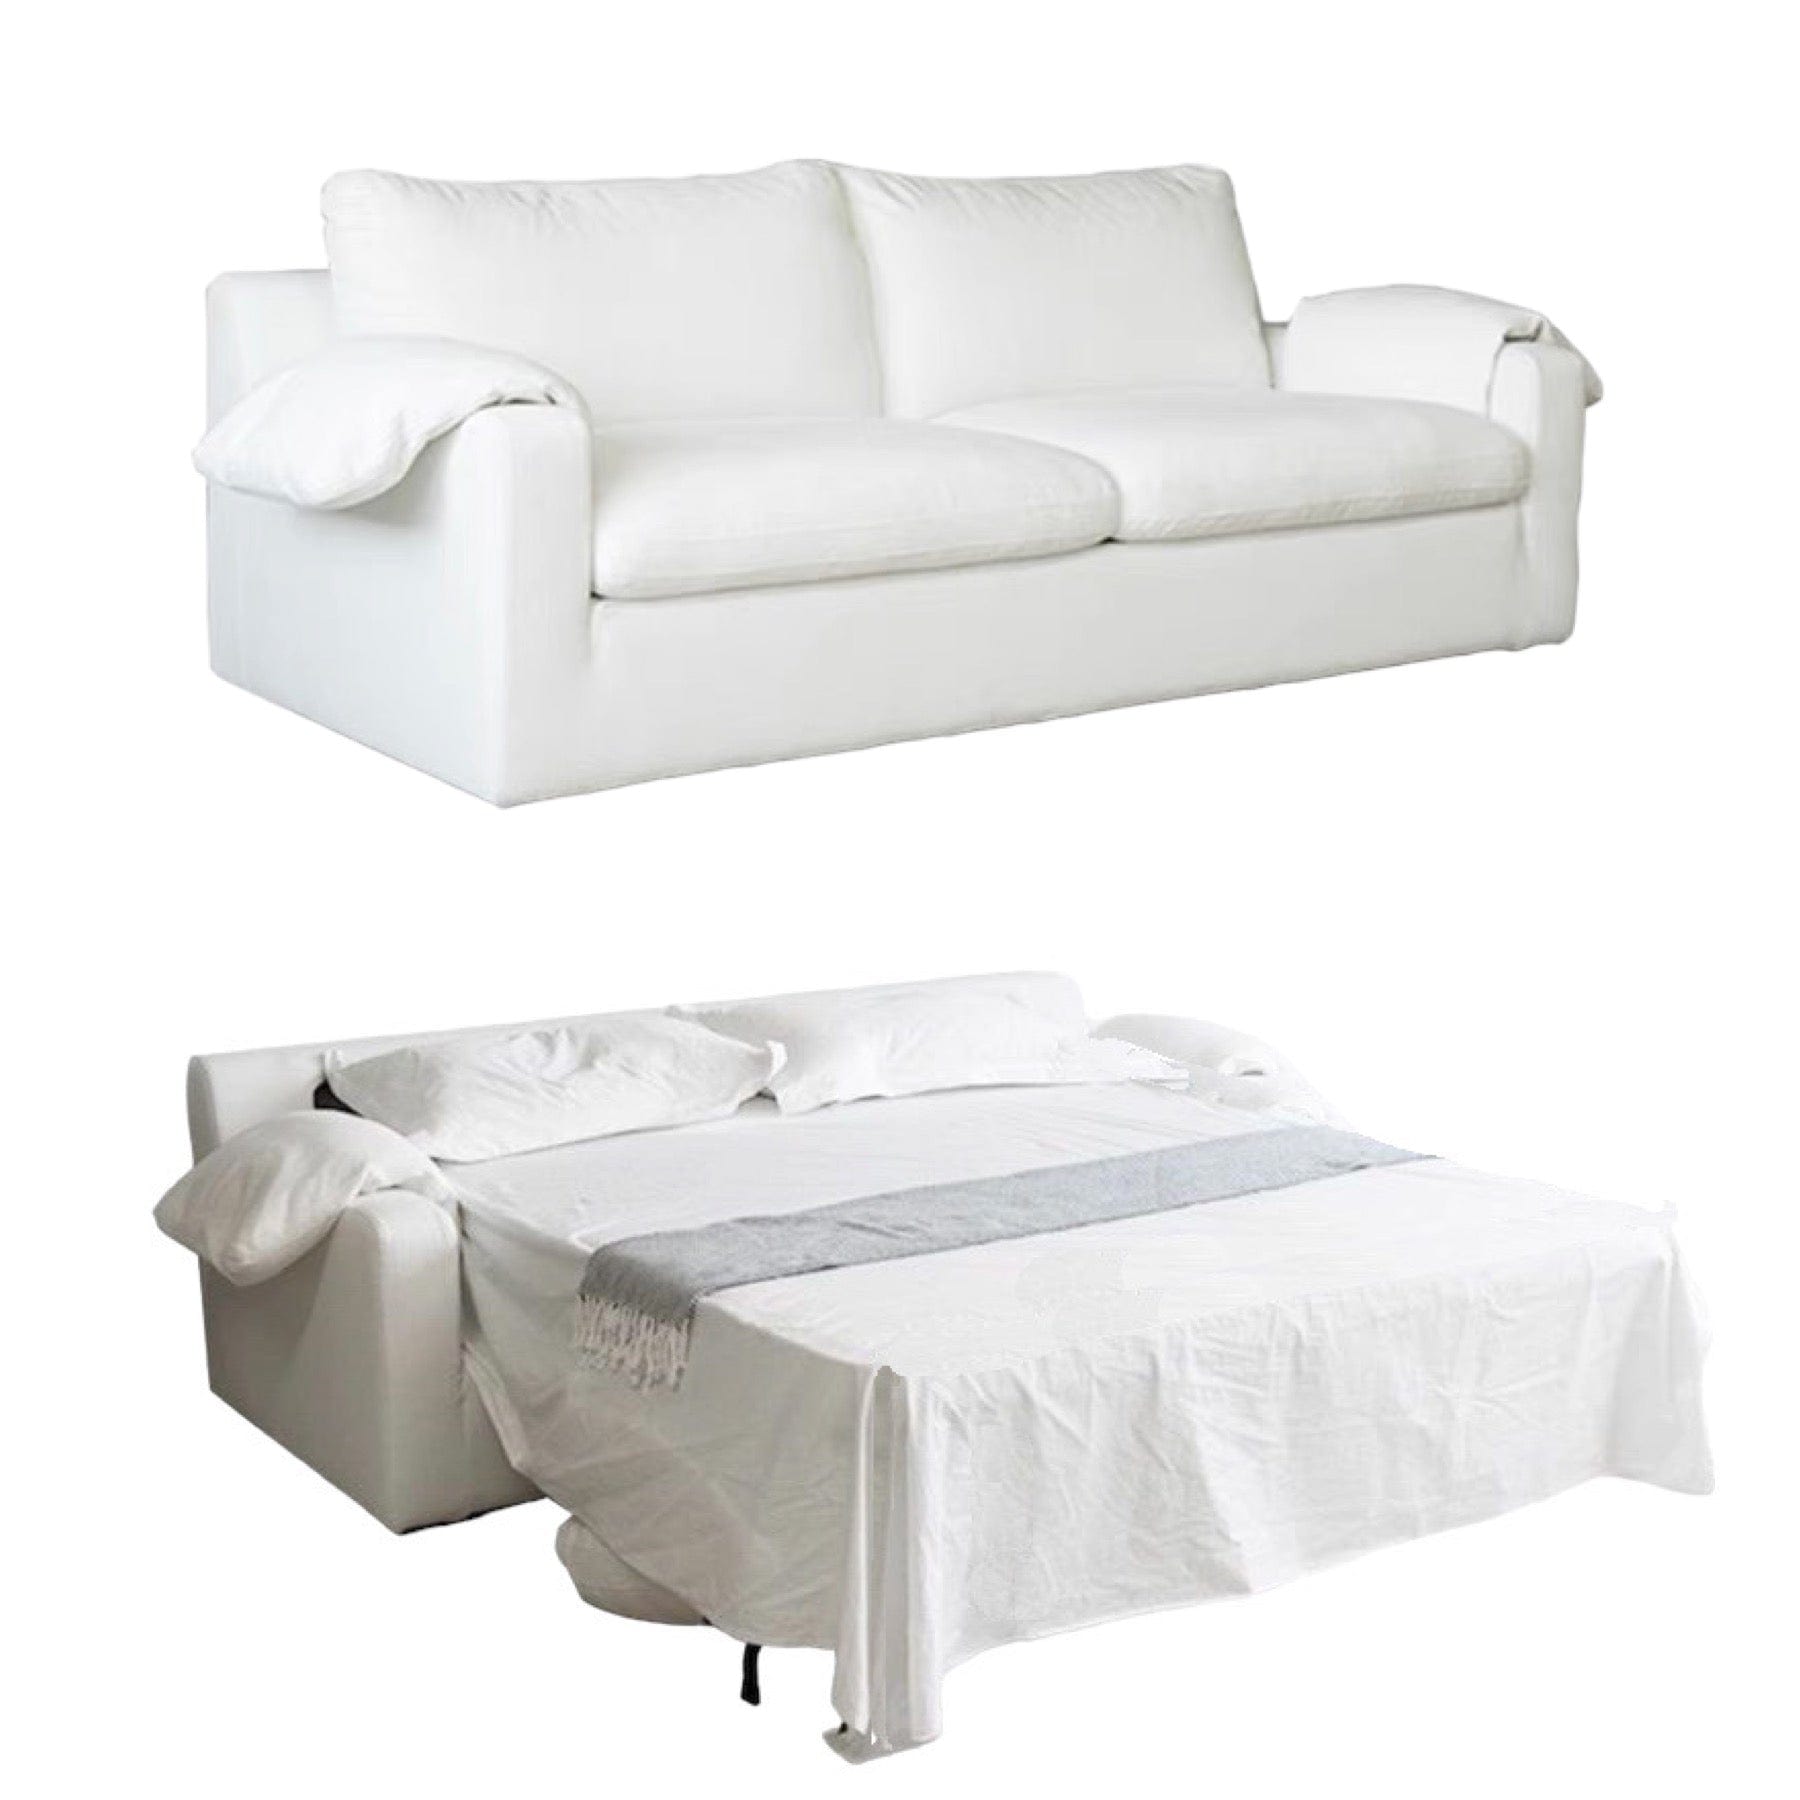 Home Atelier Aden Foldable Sofa Bed with Mattress